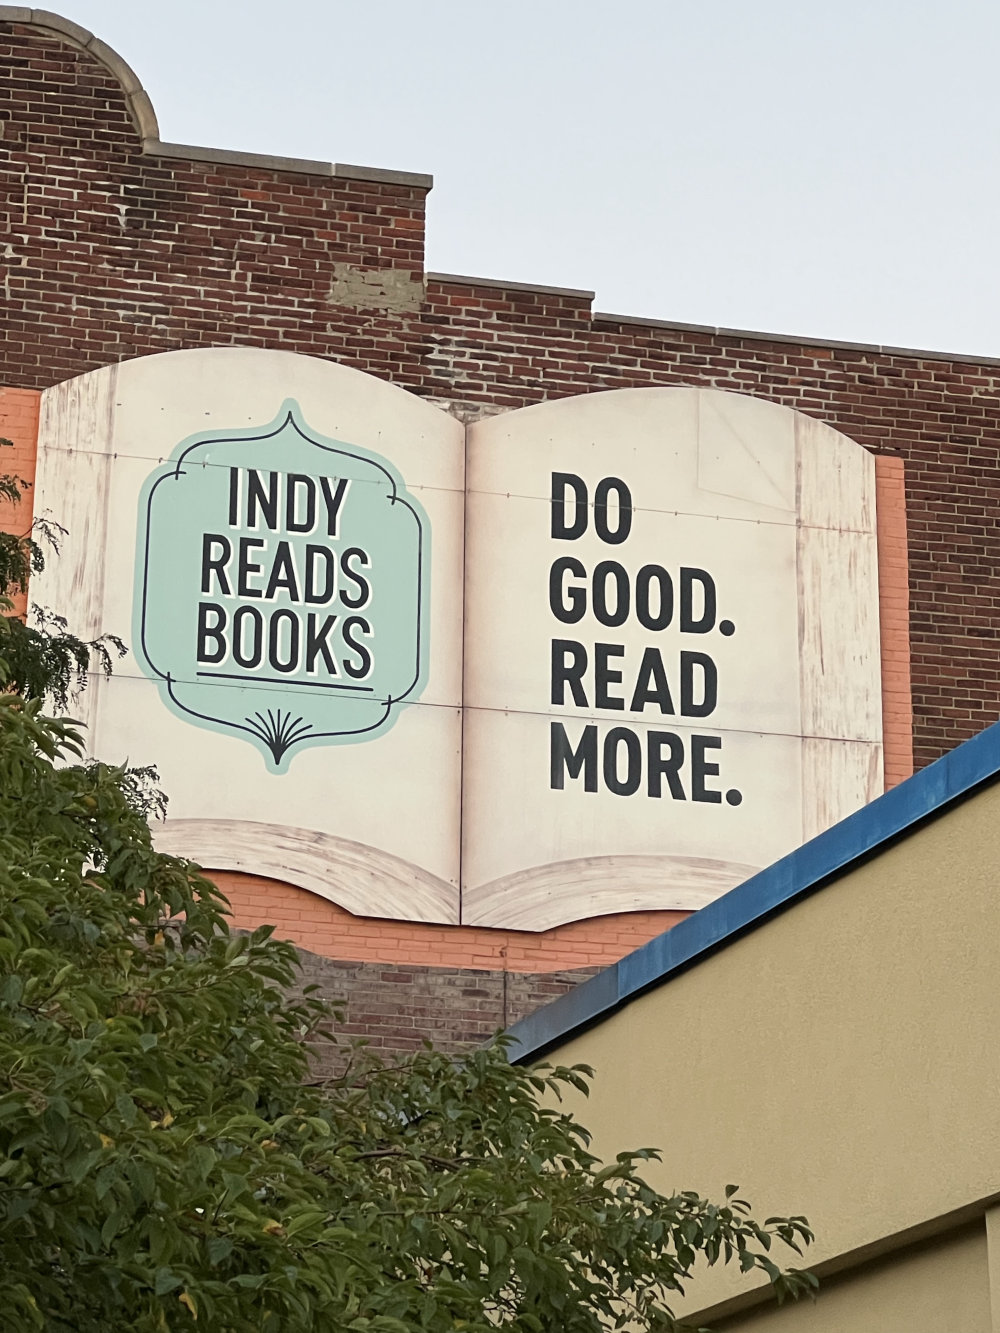 mural in Indianapolis by artist unknown.